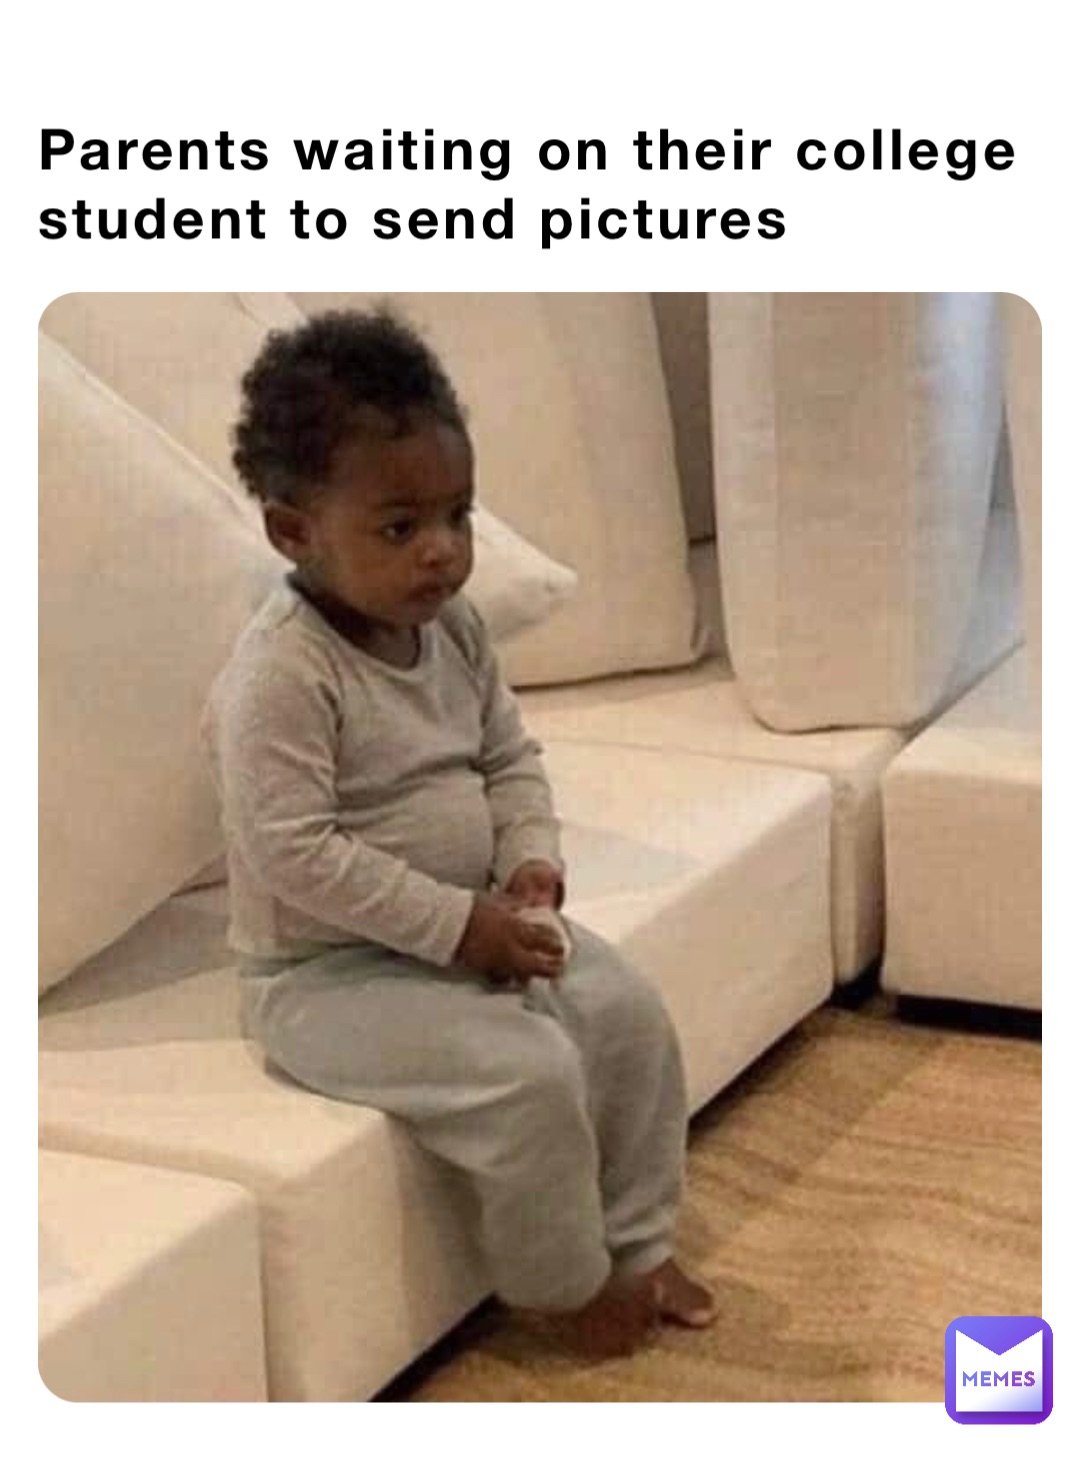 Parents waiting on their college student to send pictures